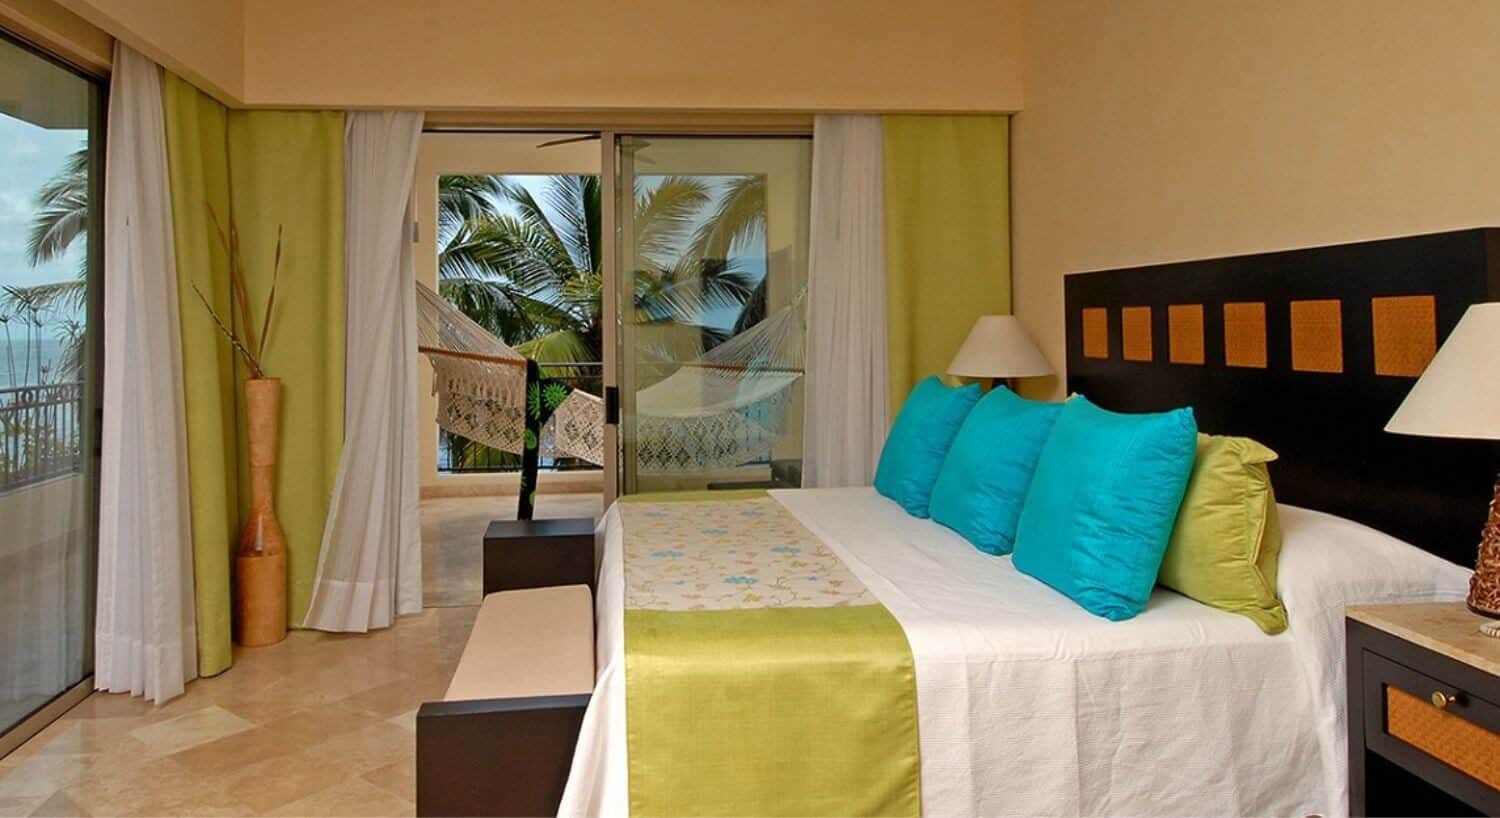 A bedroom with a king bed with white, lime and turquoise bedding, a sitting bench at the foot of the bed, lamps and nightstands on either side of the bed, and sliding doors on two sides of the room leading out to a wrap around balcony with an oversized hammock, and views of palm trees and the ocean.